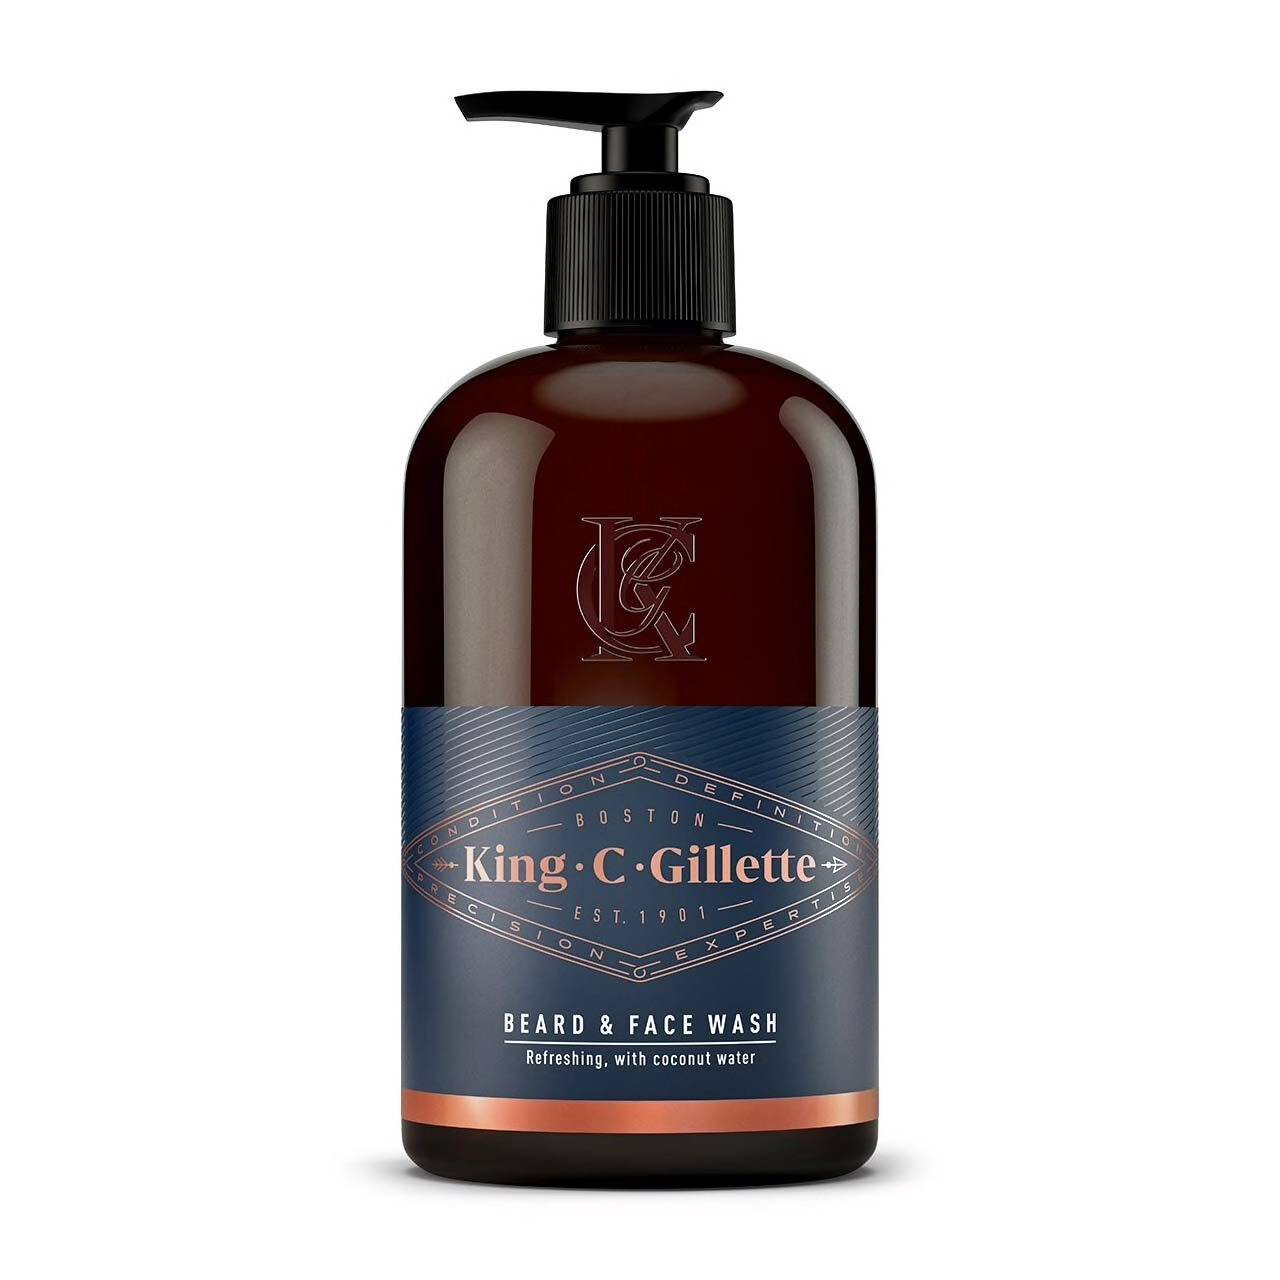 King C. Gillette Beard and Face Wash 